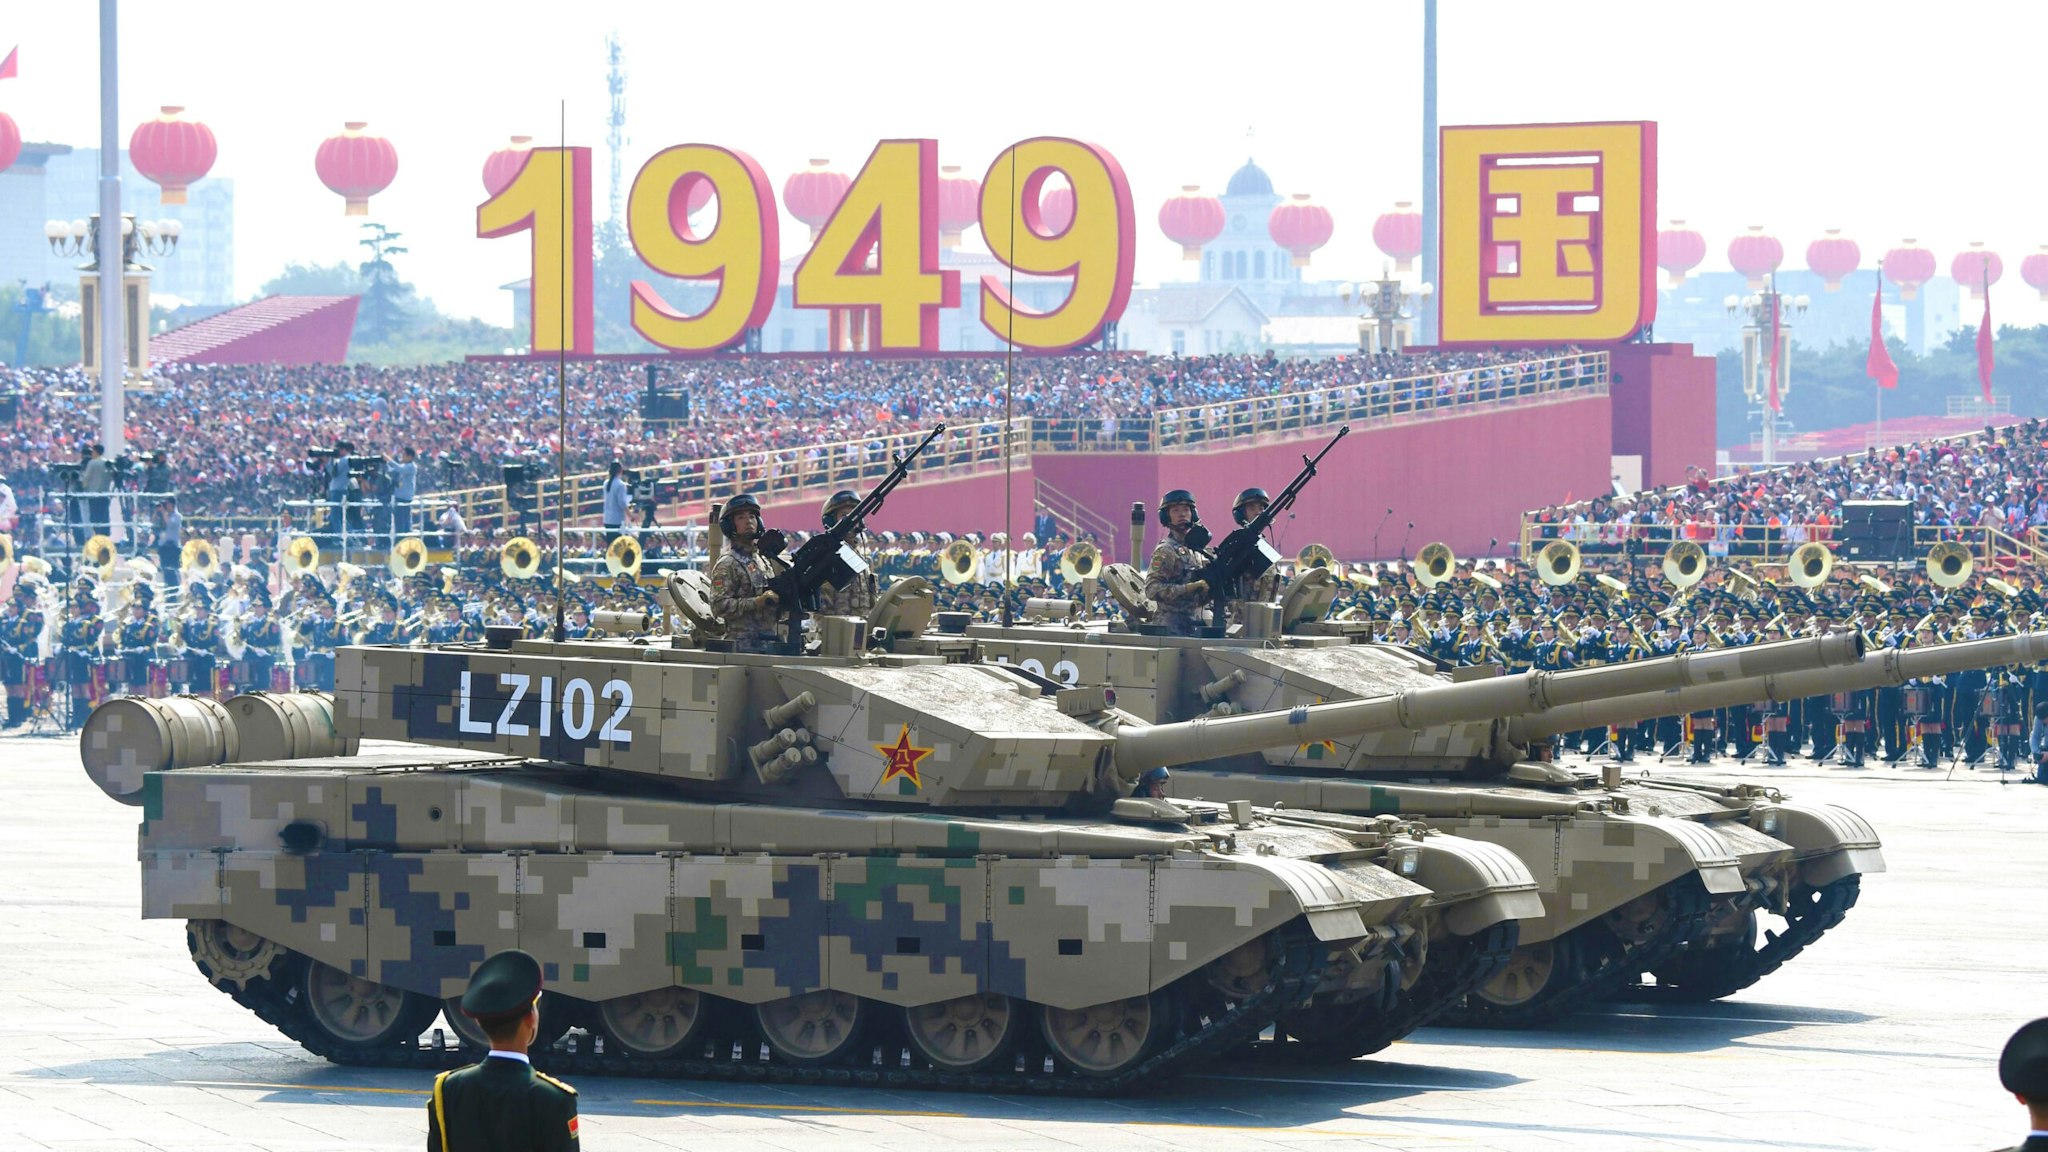 Military vehicles take part in a military parade at Tiananmen Square in Beijing on October 1, 2019, to mark the 70th anniversary of the founding of the Peoples Republic of China.